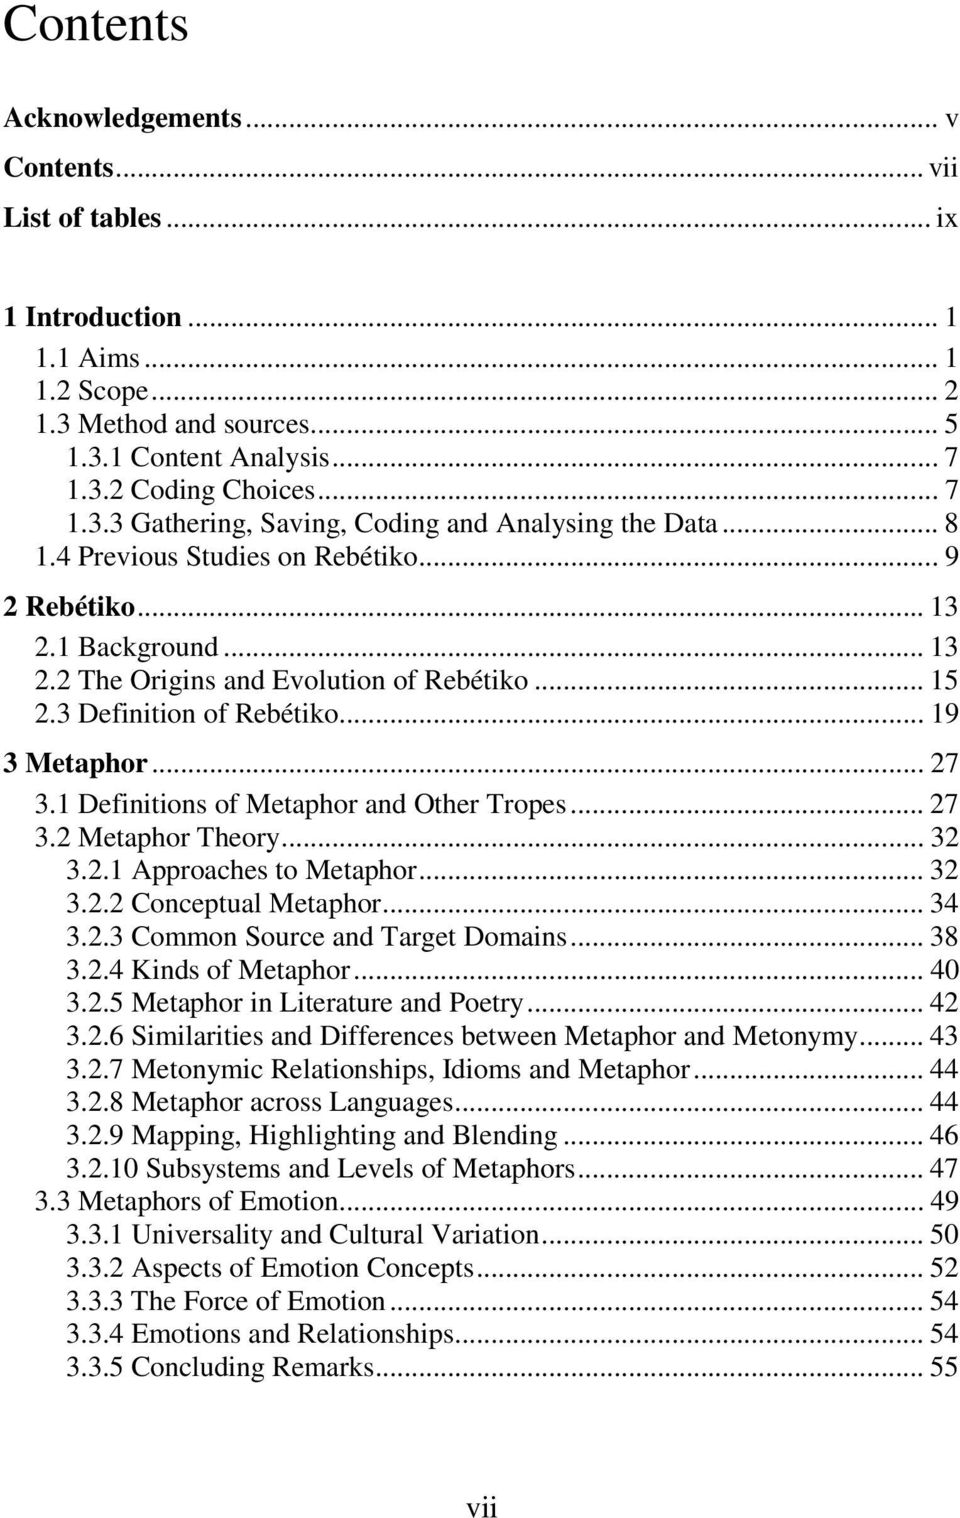 1 Definitions of Metaphor and Other Tropes... 27 3.2 Metaphor Theory... 32 3.2.1 Approaches to Metaphor... 32 3.2.2 Conceptual Metaphor... 34 3.2.3 Common Source and Target Domains... 38 3.2.4 Kinds of Metaphor.